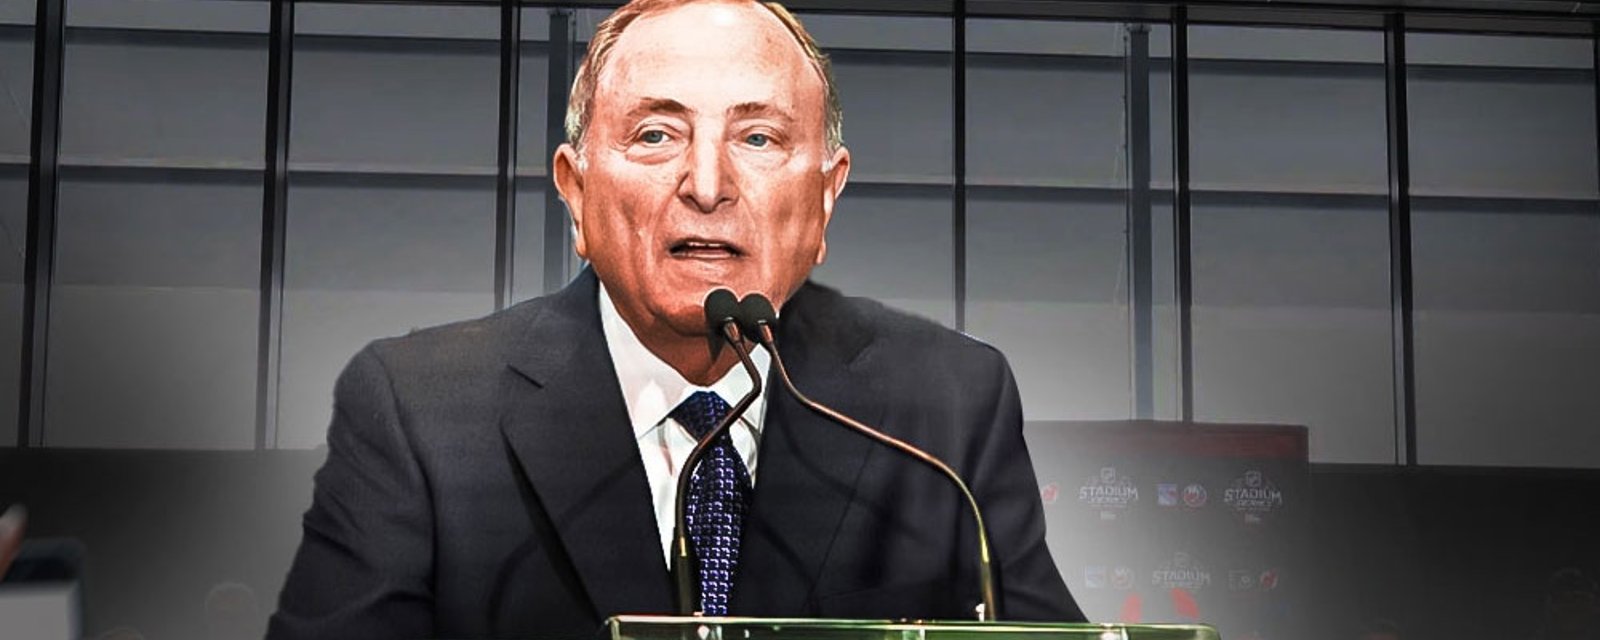 Gary Bettman begins expansion plans, meets with reps from two Southern markets